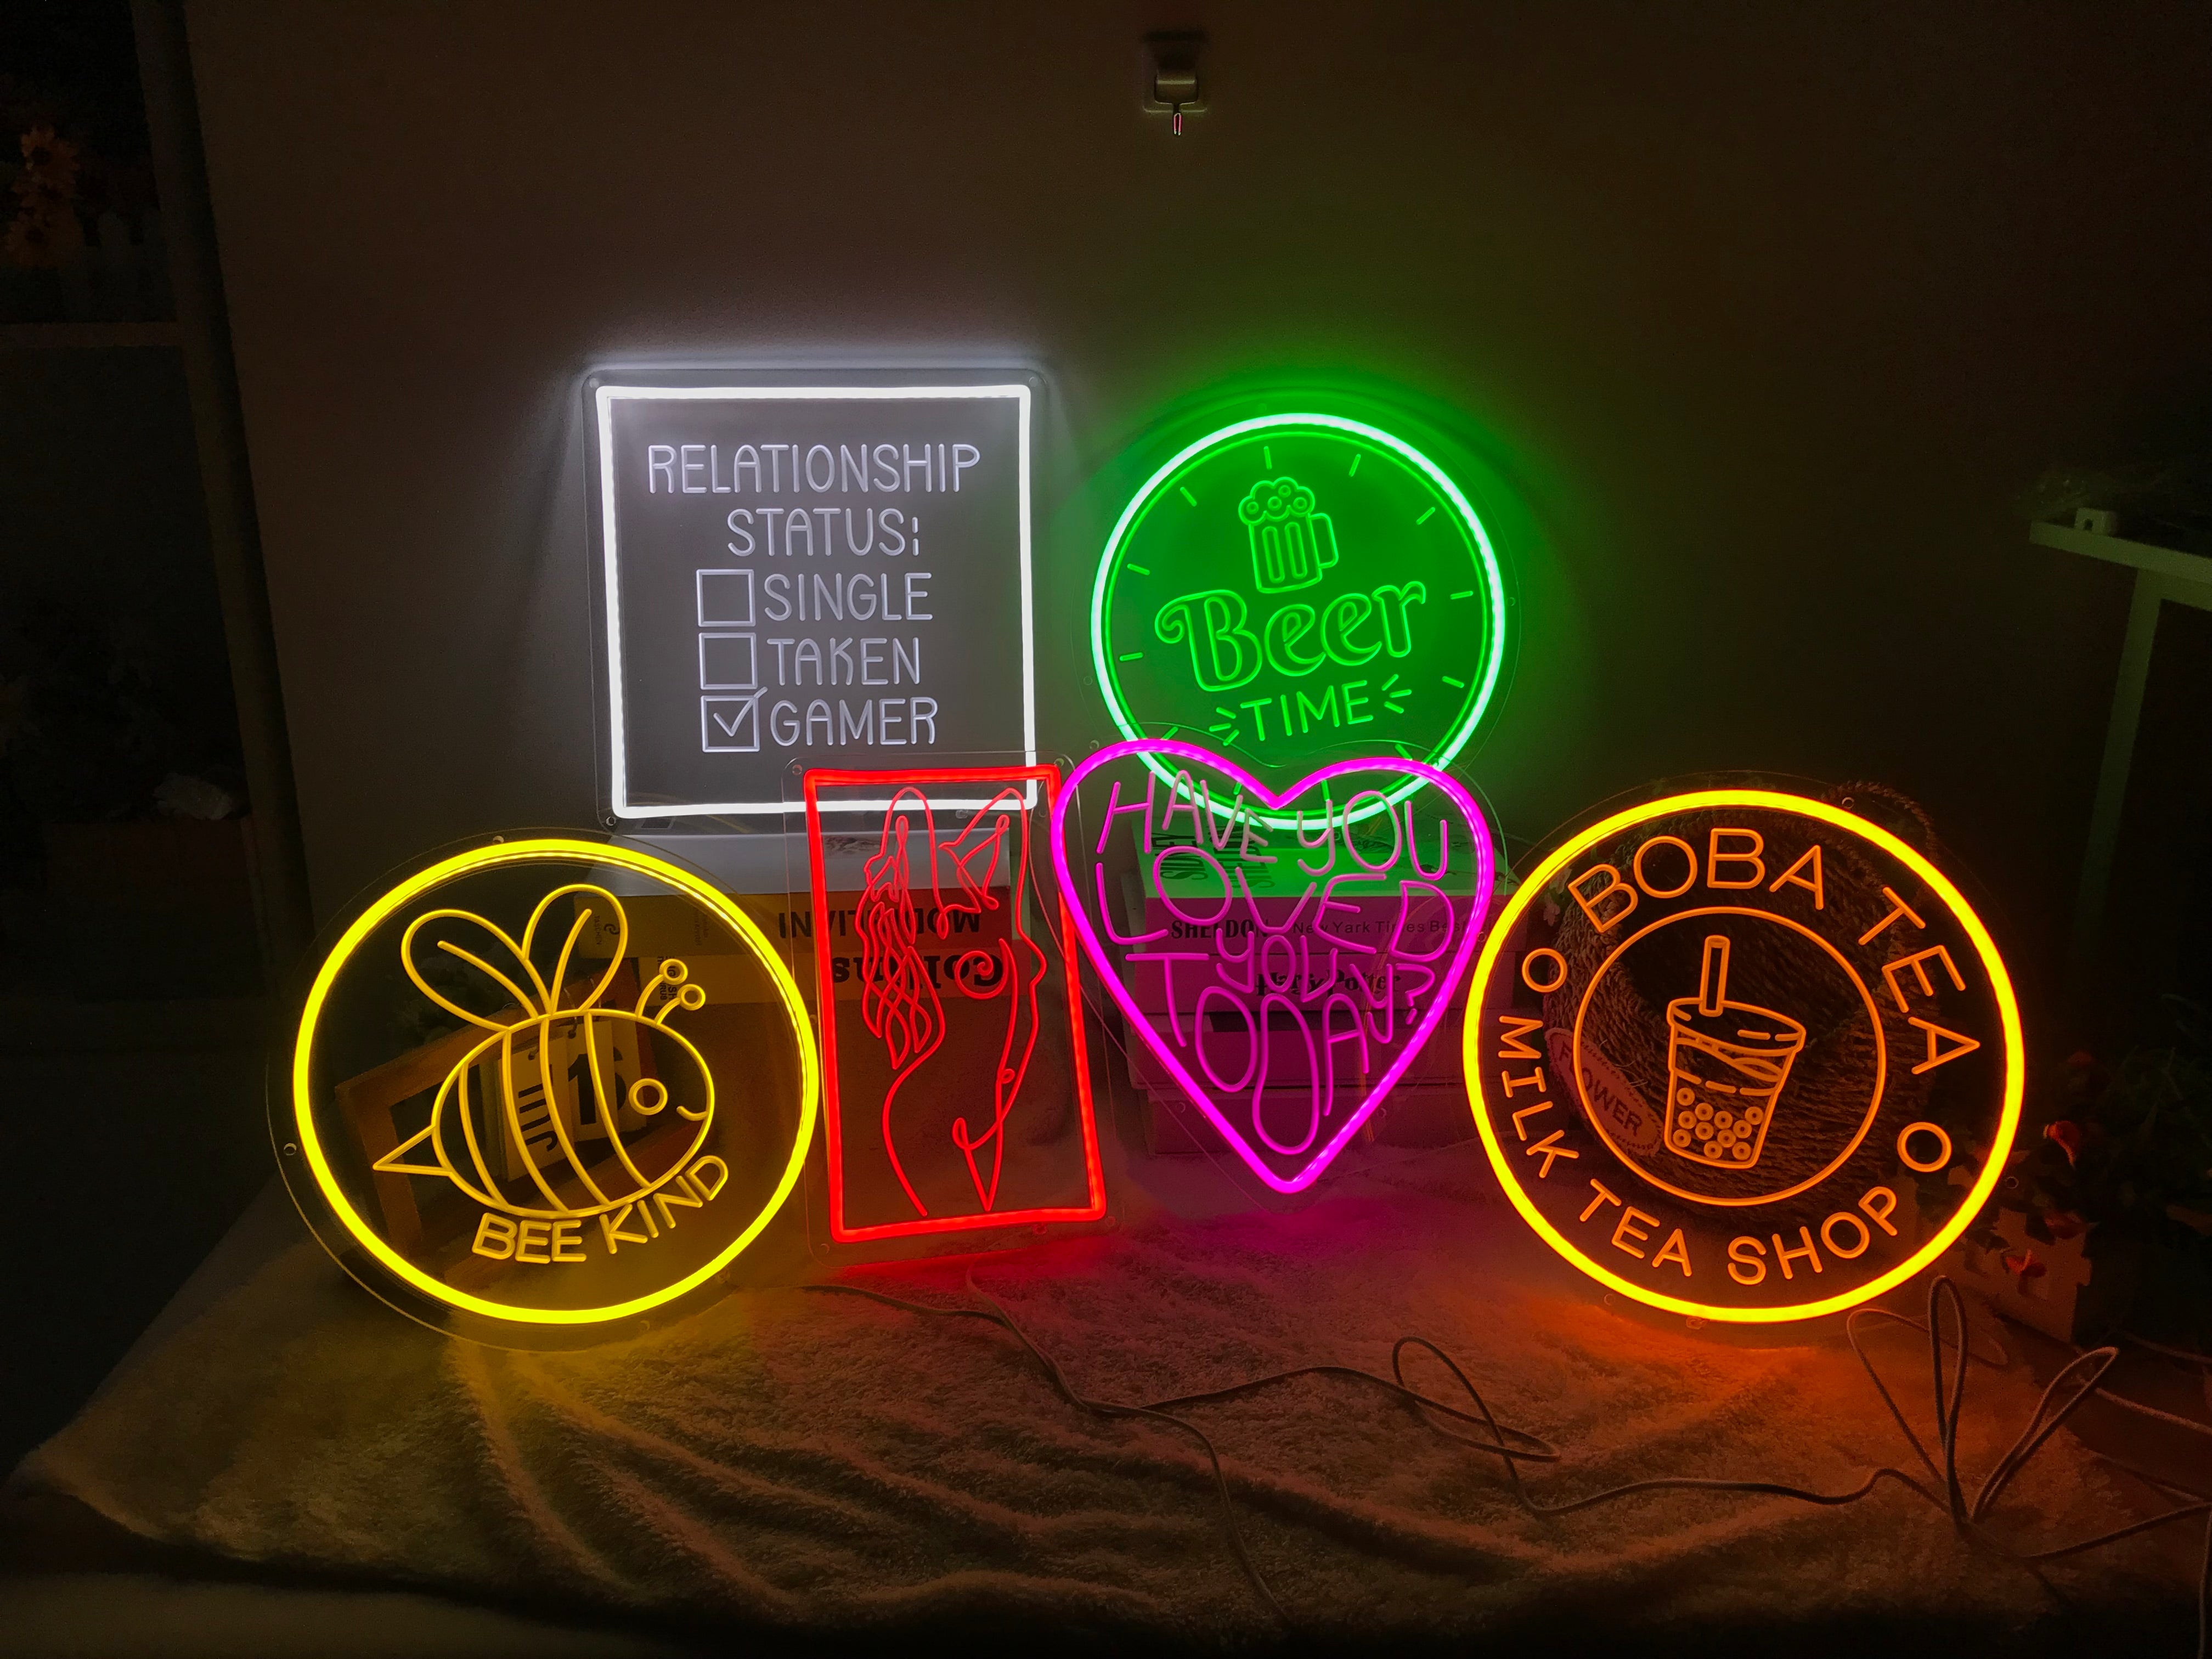 "Donut Give Up Food Dessert" Mini Neon Sign